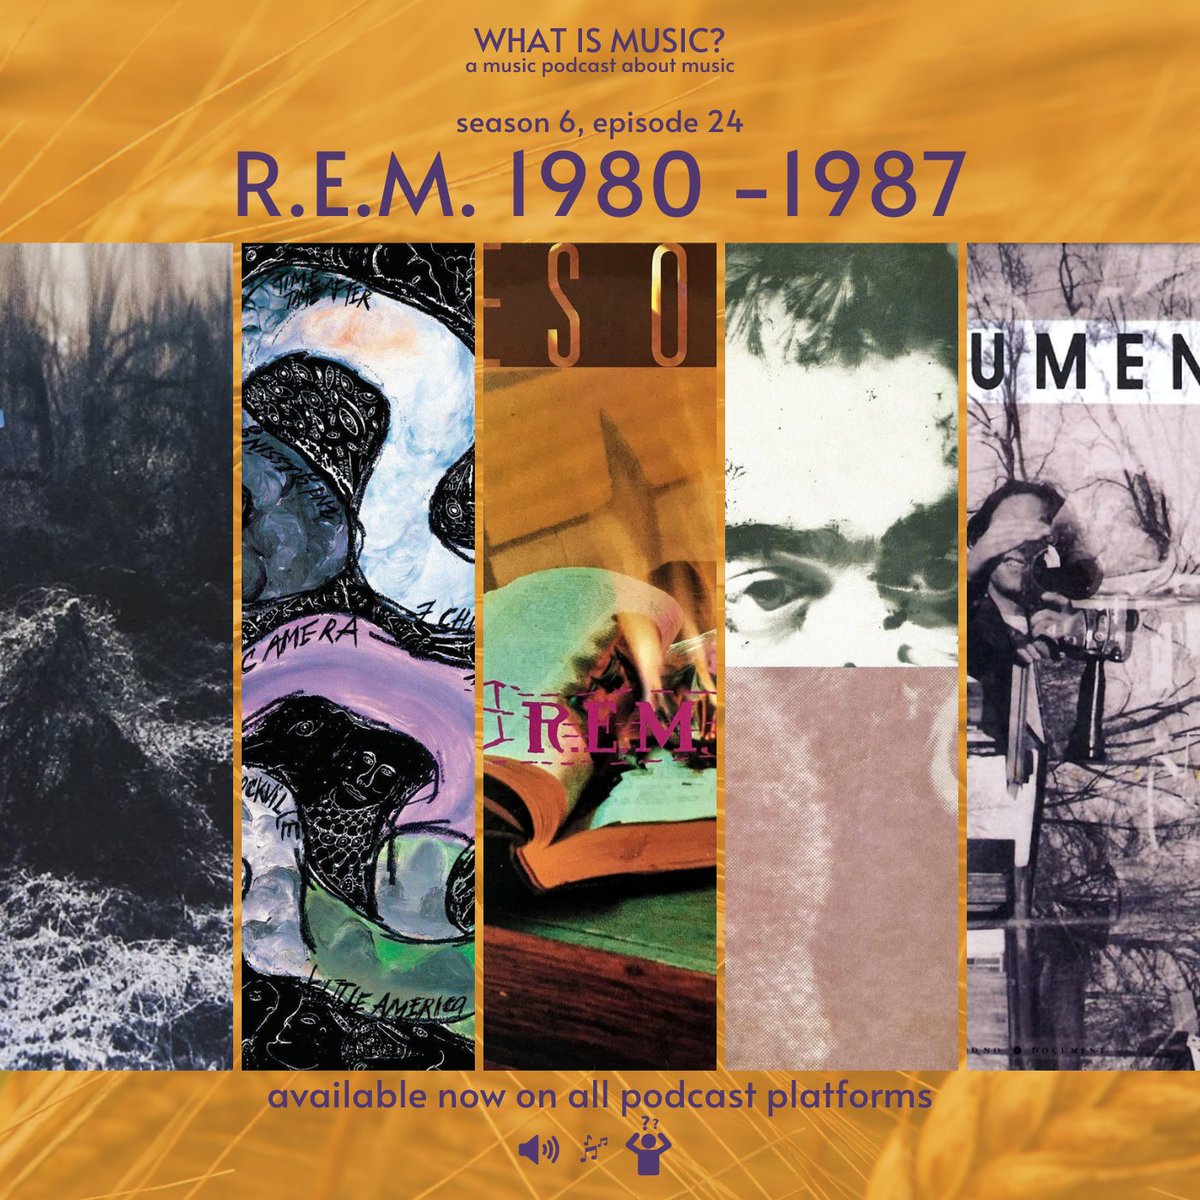 This week, on our R.E.M. podcast, we take stock of their career so far. We look back at the albums encompassing 'the I.R.S. years', sum up our thoughts on the band, and reveal our own personal Top 10 Songs So Far Lists! Listen now wherever you get your podcasts! #remband